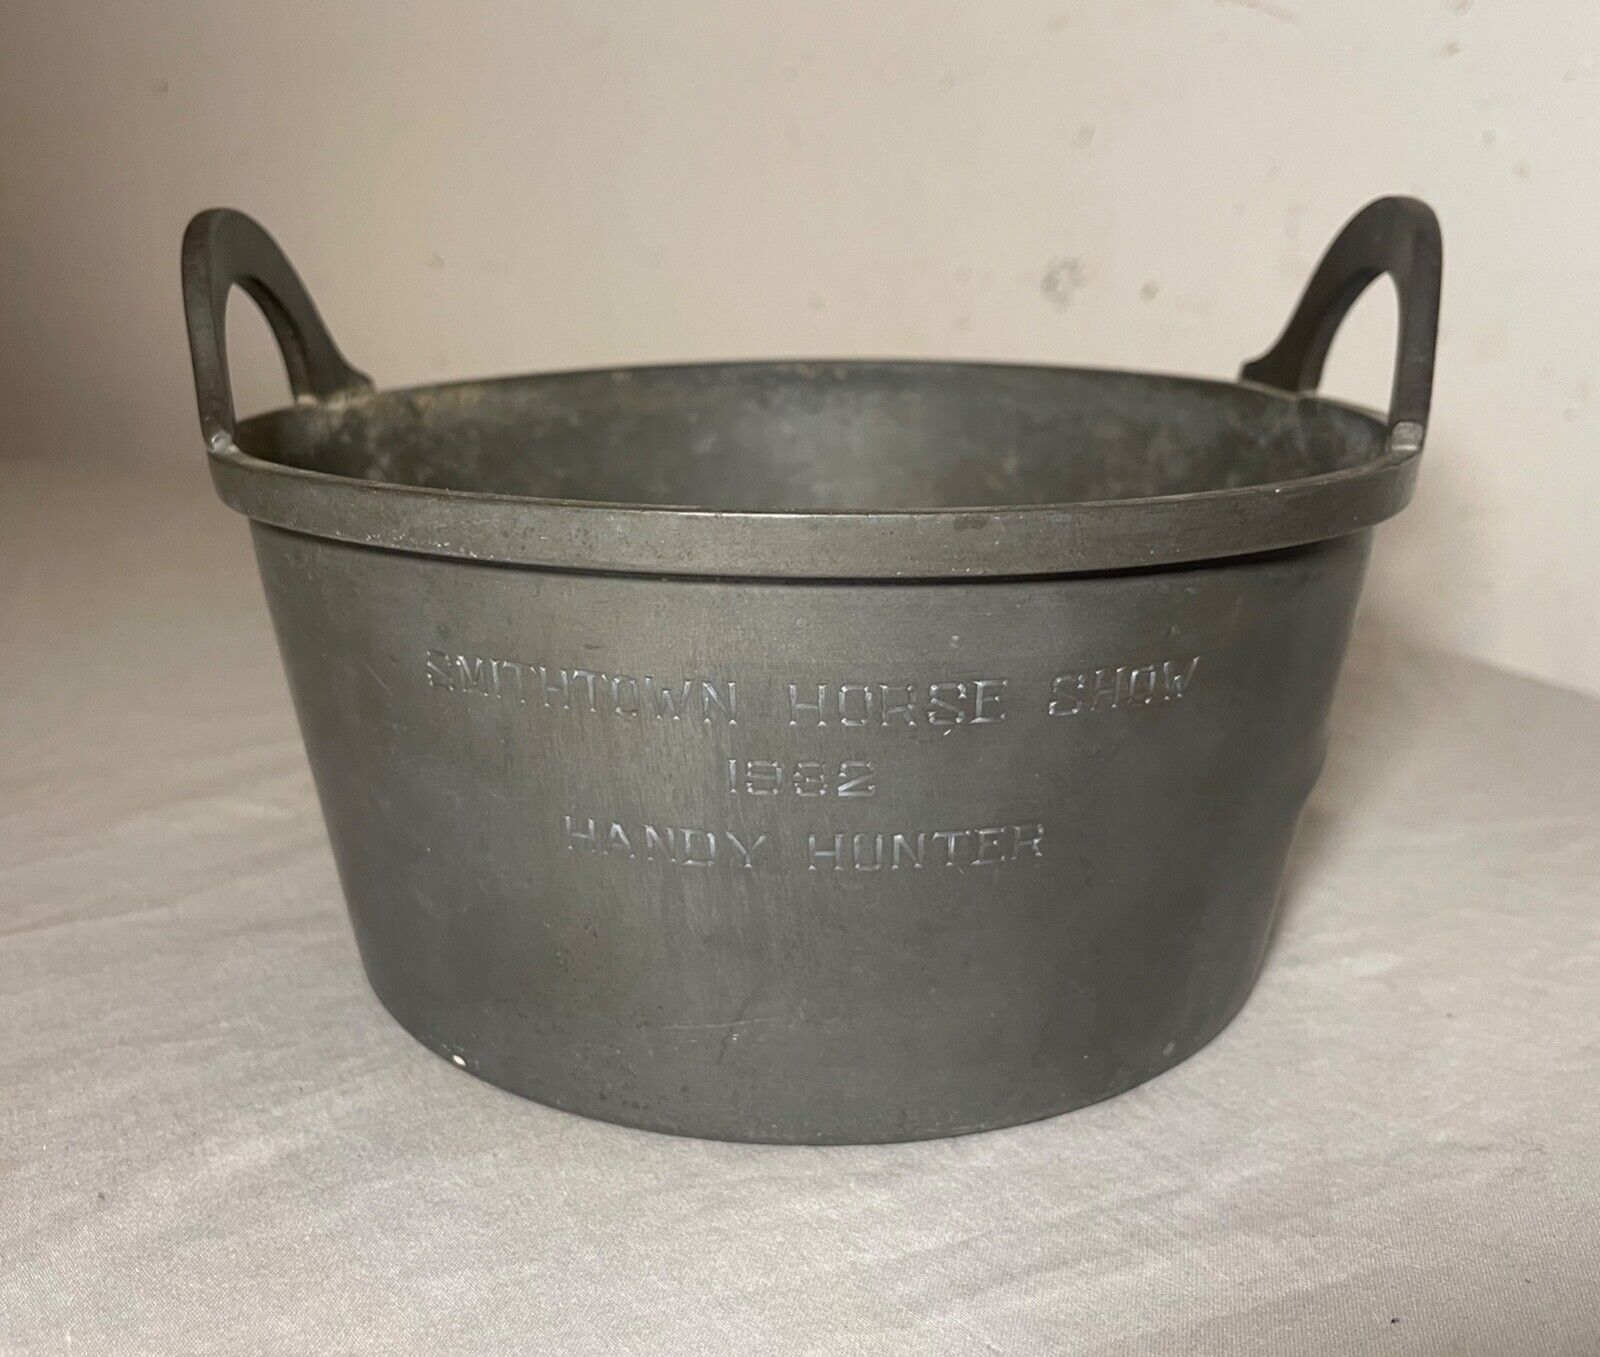 RARE antique 1932 Smithtown Horse Show pewter trough shaped trophy award